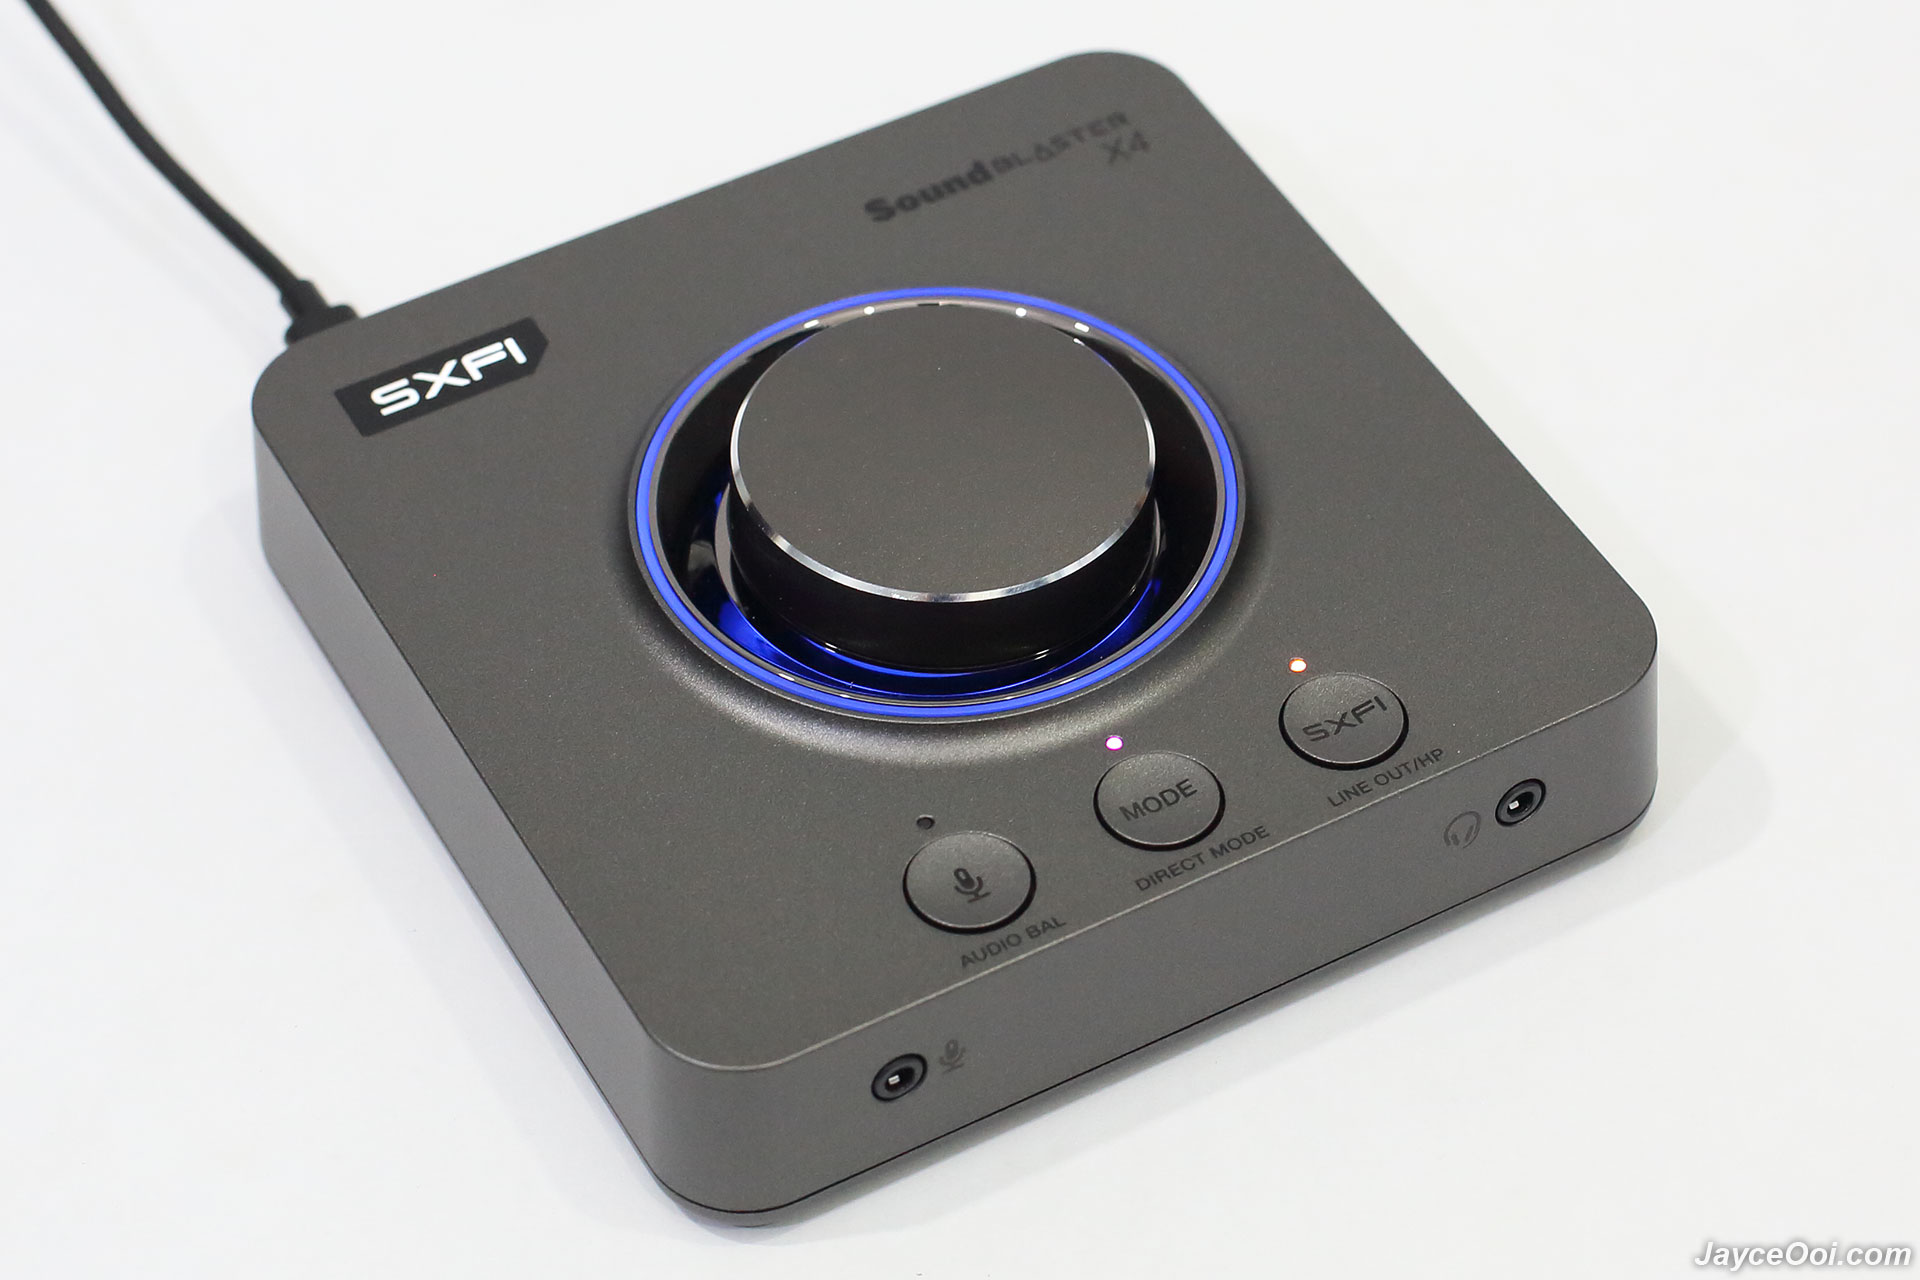 Creative Sound Blaster X4 Review - One External USB DAC to Rule 